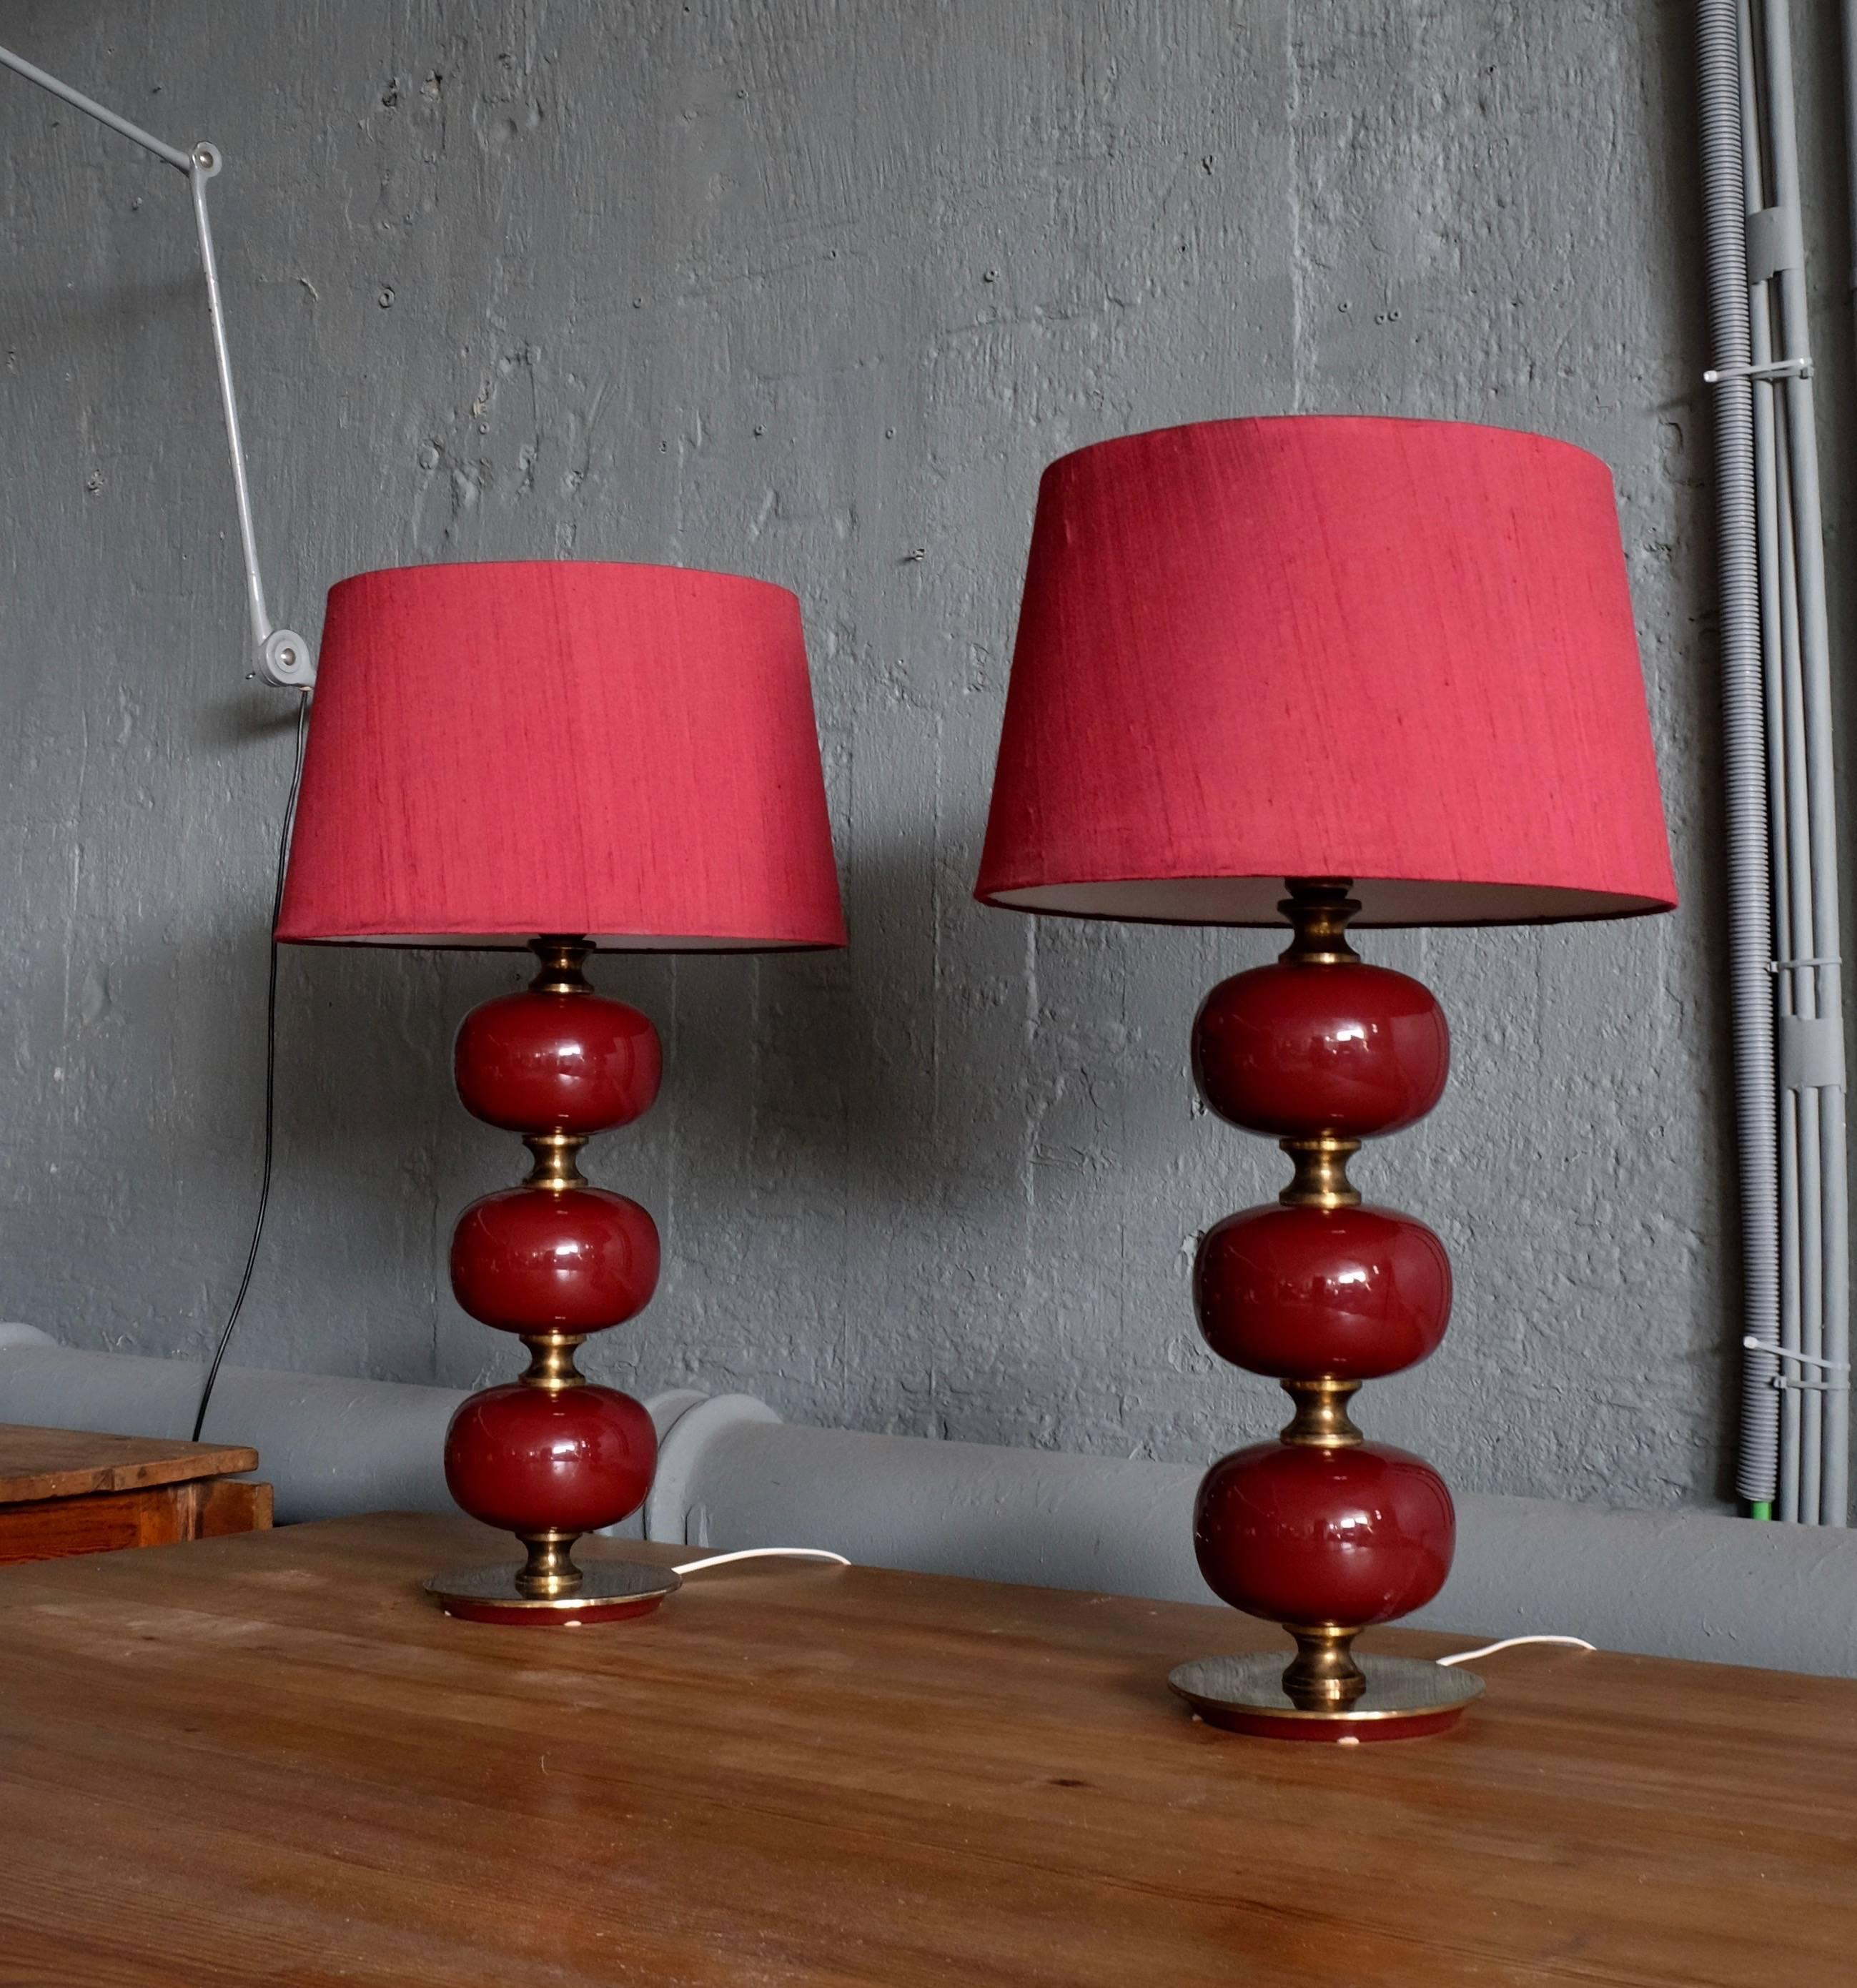 Scandinavian Modern Pair of Swedish Glass and Brass Table Lamps by Tranås Stilarmatur, 1960s For Sale